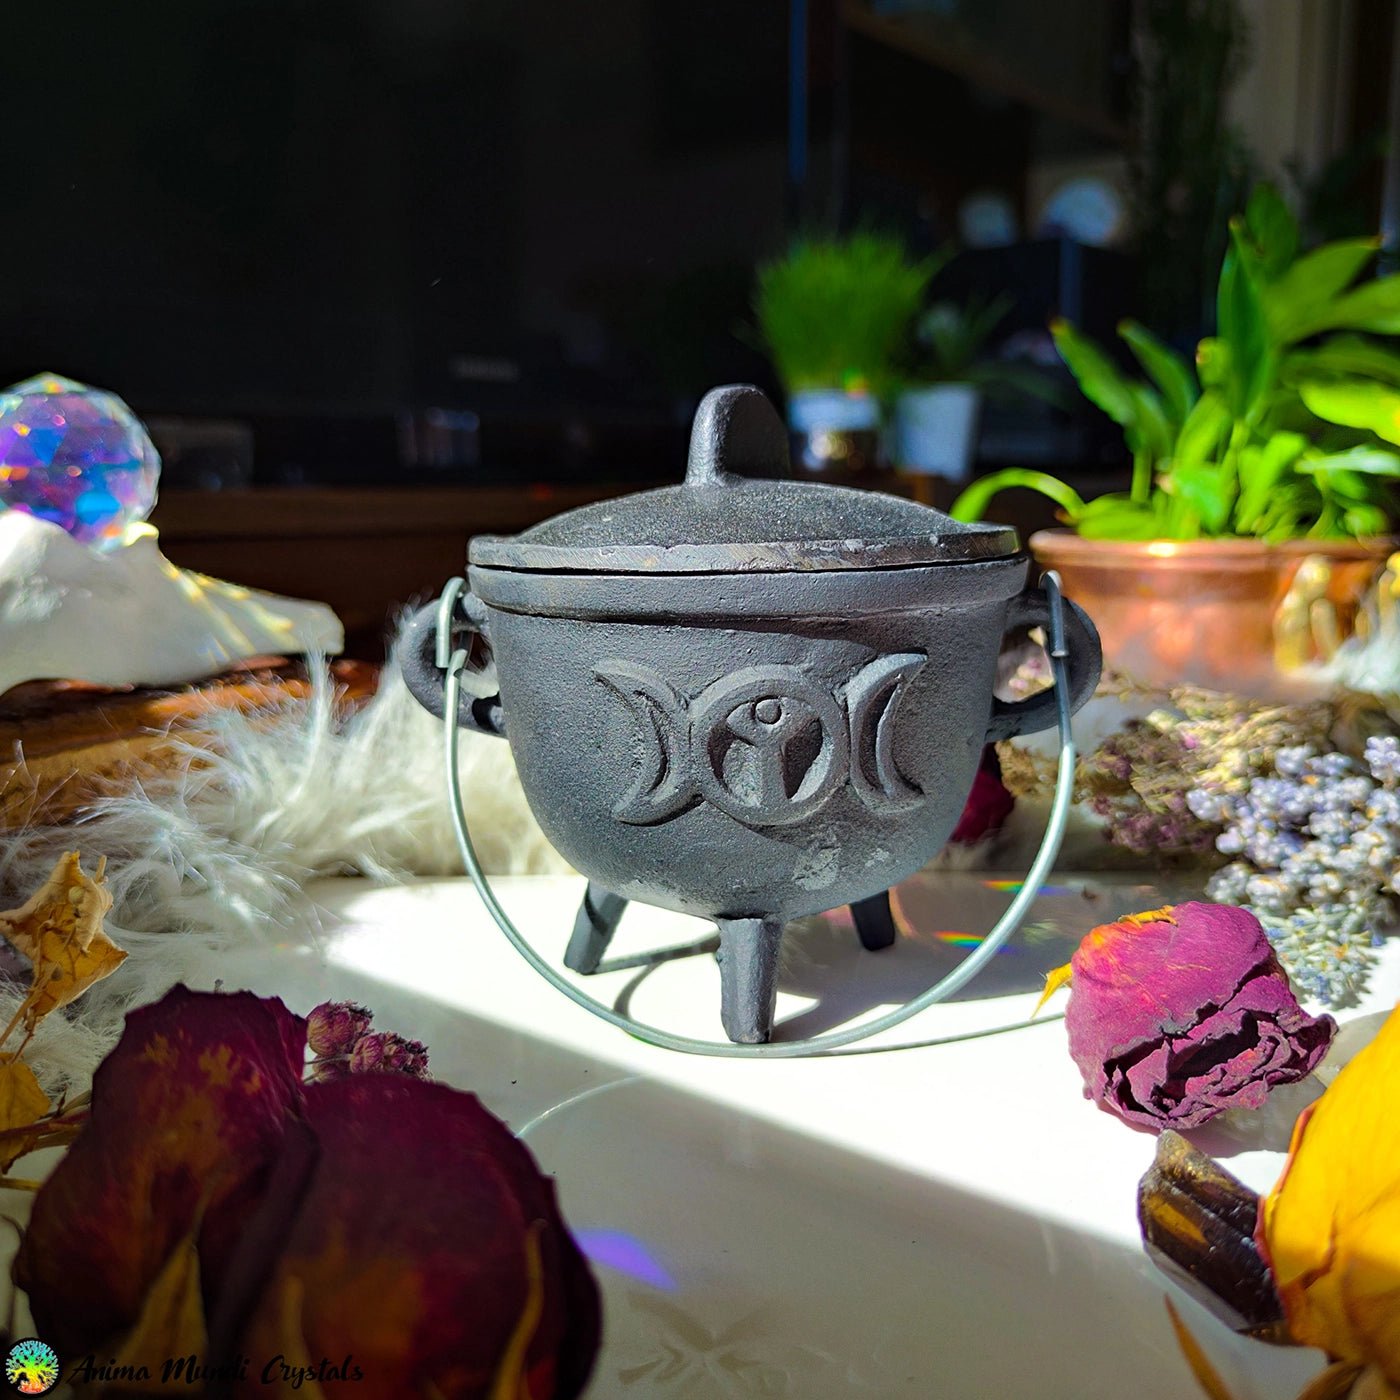 Triple Moon Goddess Cast Iron Cauldron | Witchcraft Altar Tool for Spells, Incense, and Rituals - Anima Mundi Crystals